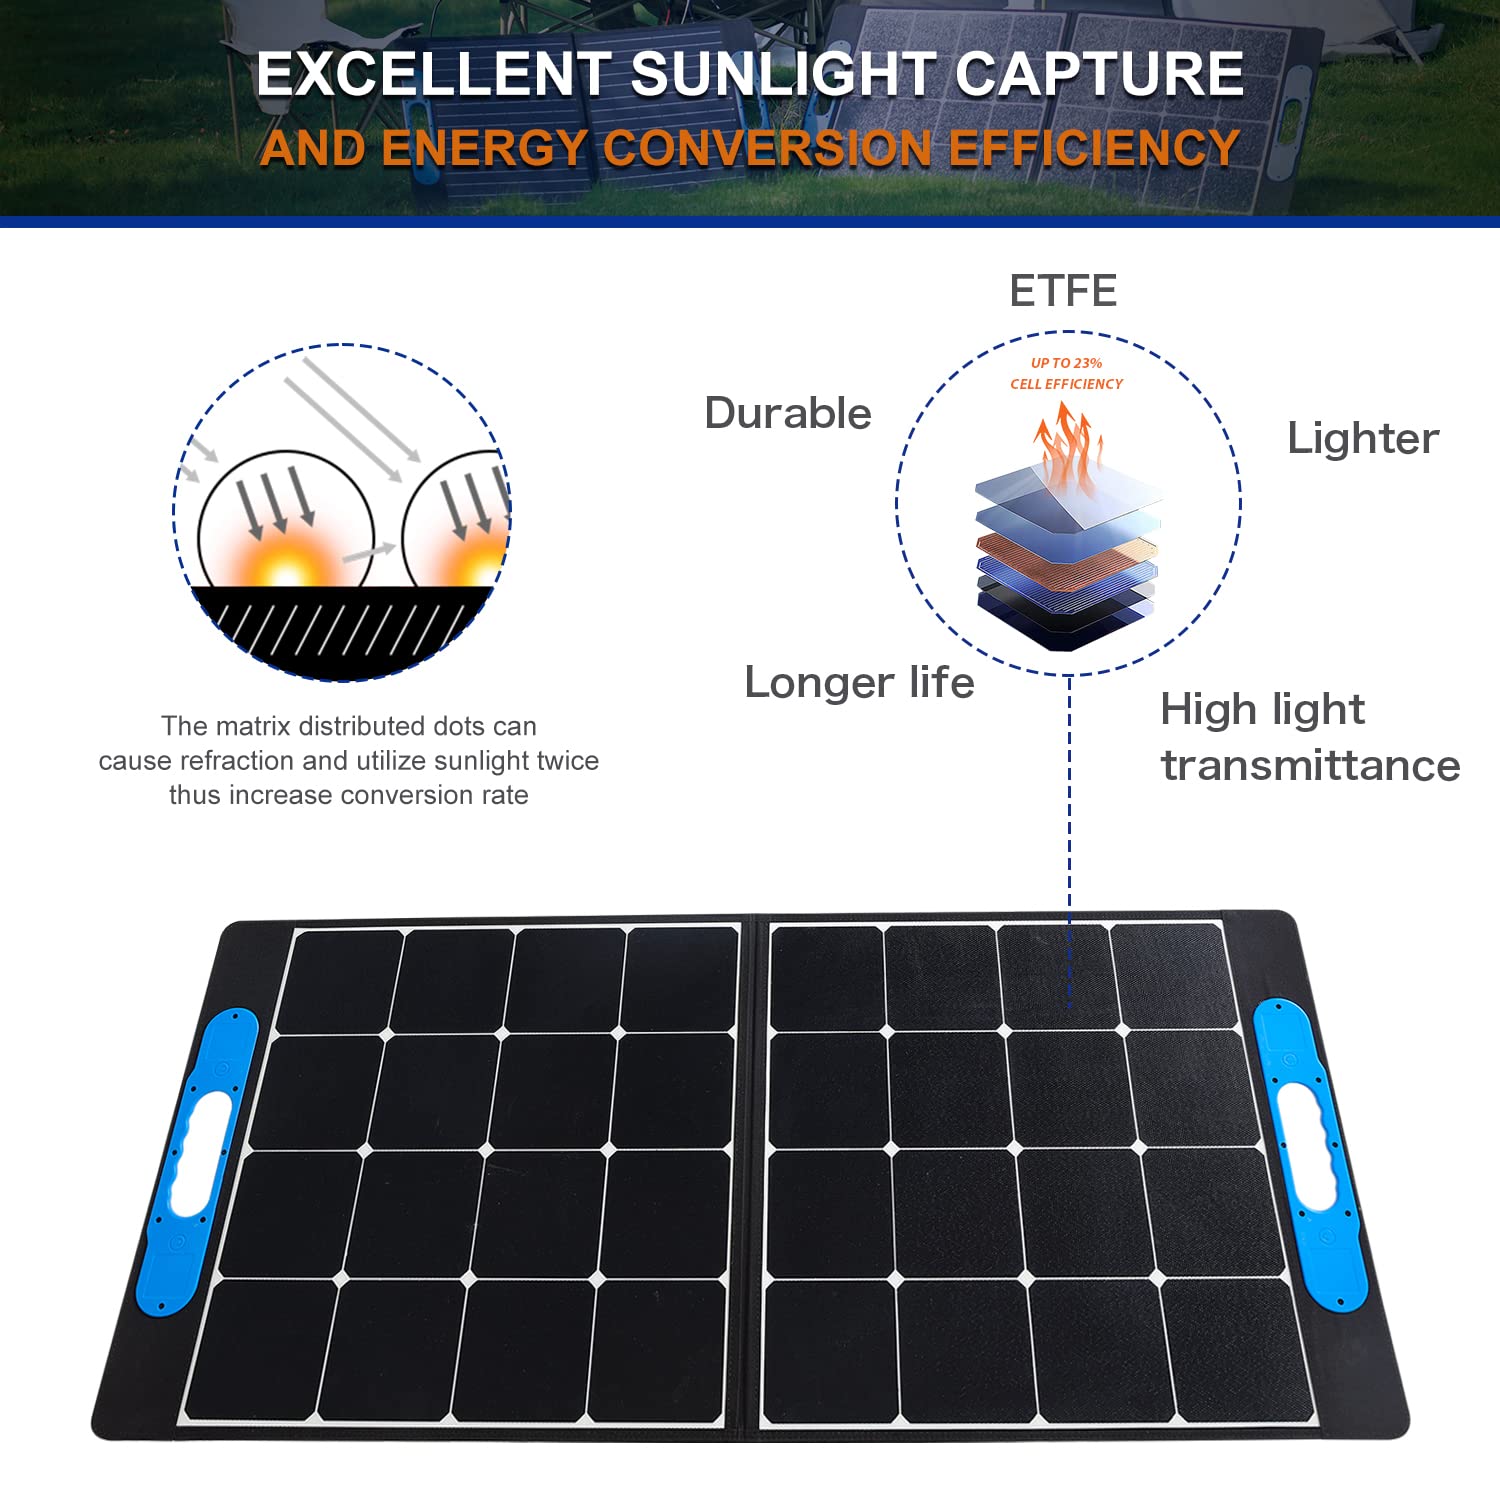 100w Solar Panel Portable, Ericsity Folding Solar Panel for Camping with SunPower Solar Panel Cells Portable Solar Charger Solar Panel for Power Station, Camping RV Hiking,Off-Grid Living or Backyard